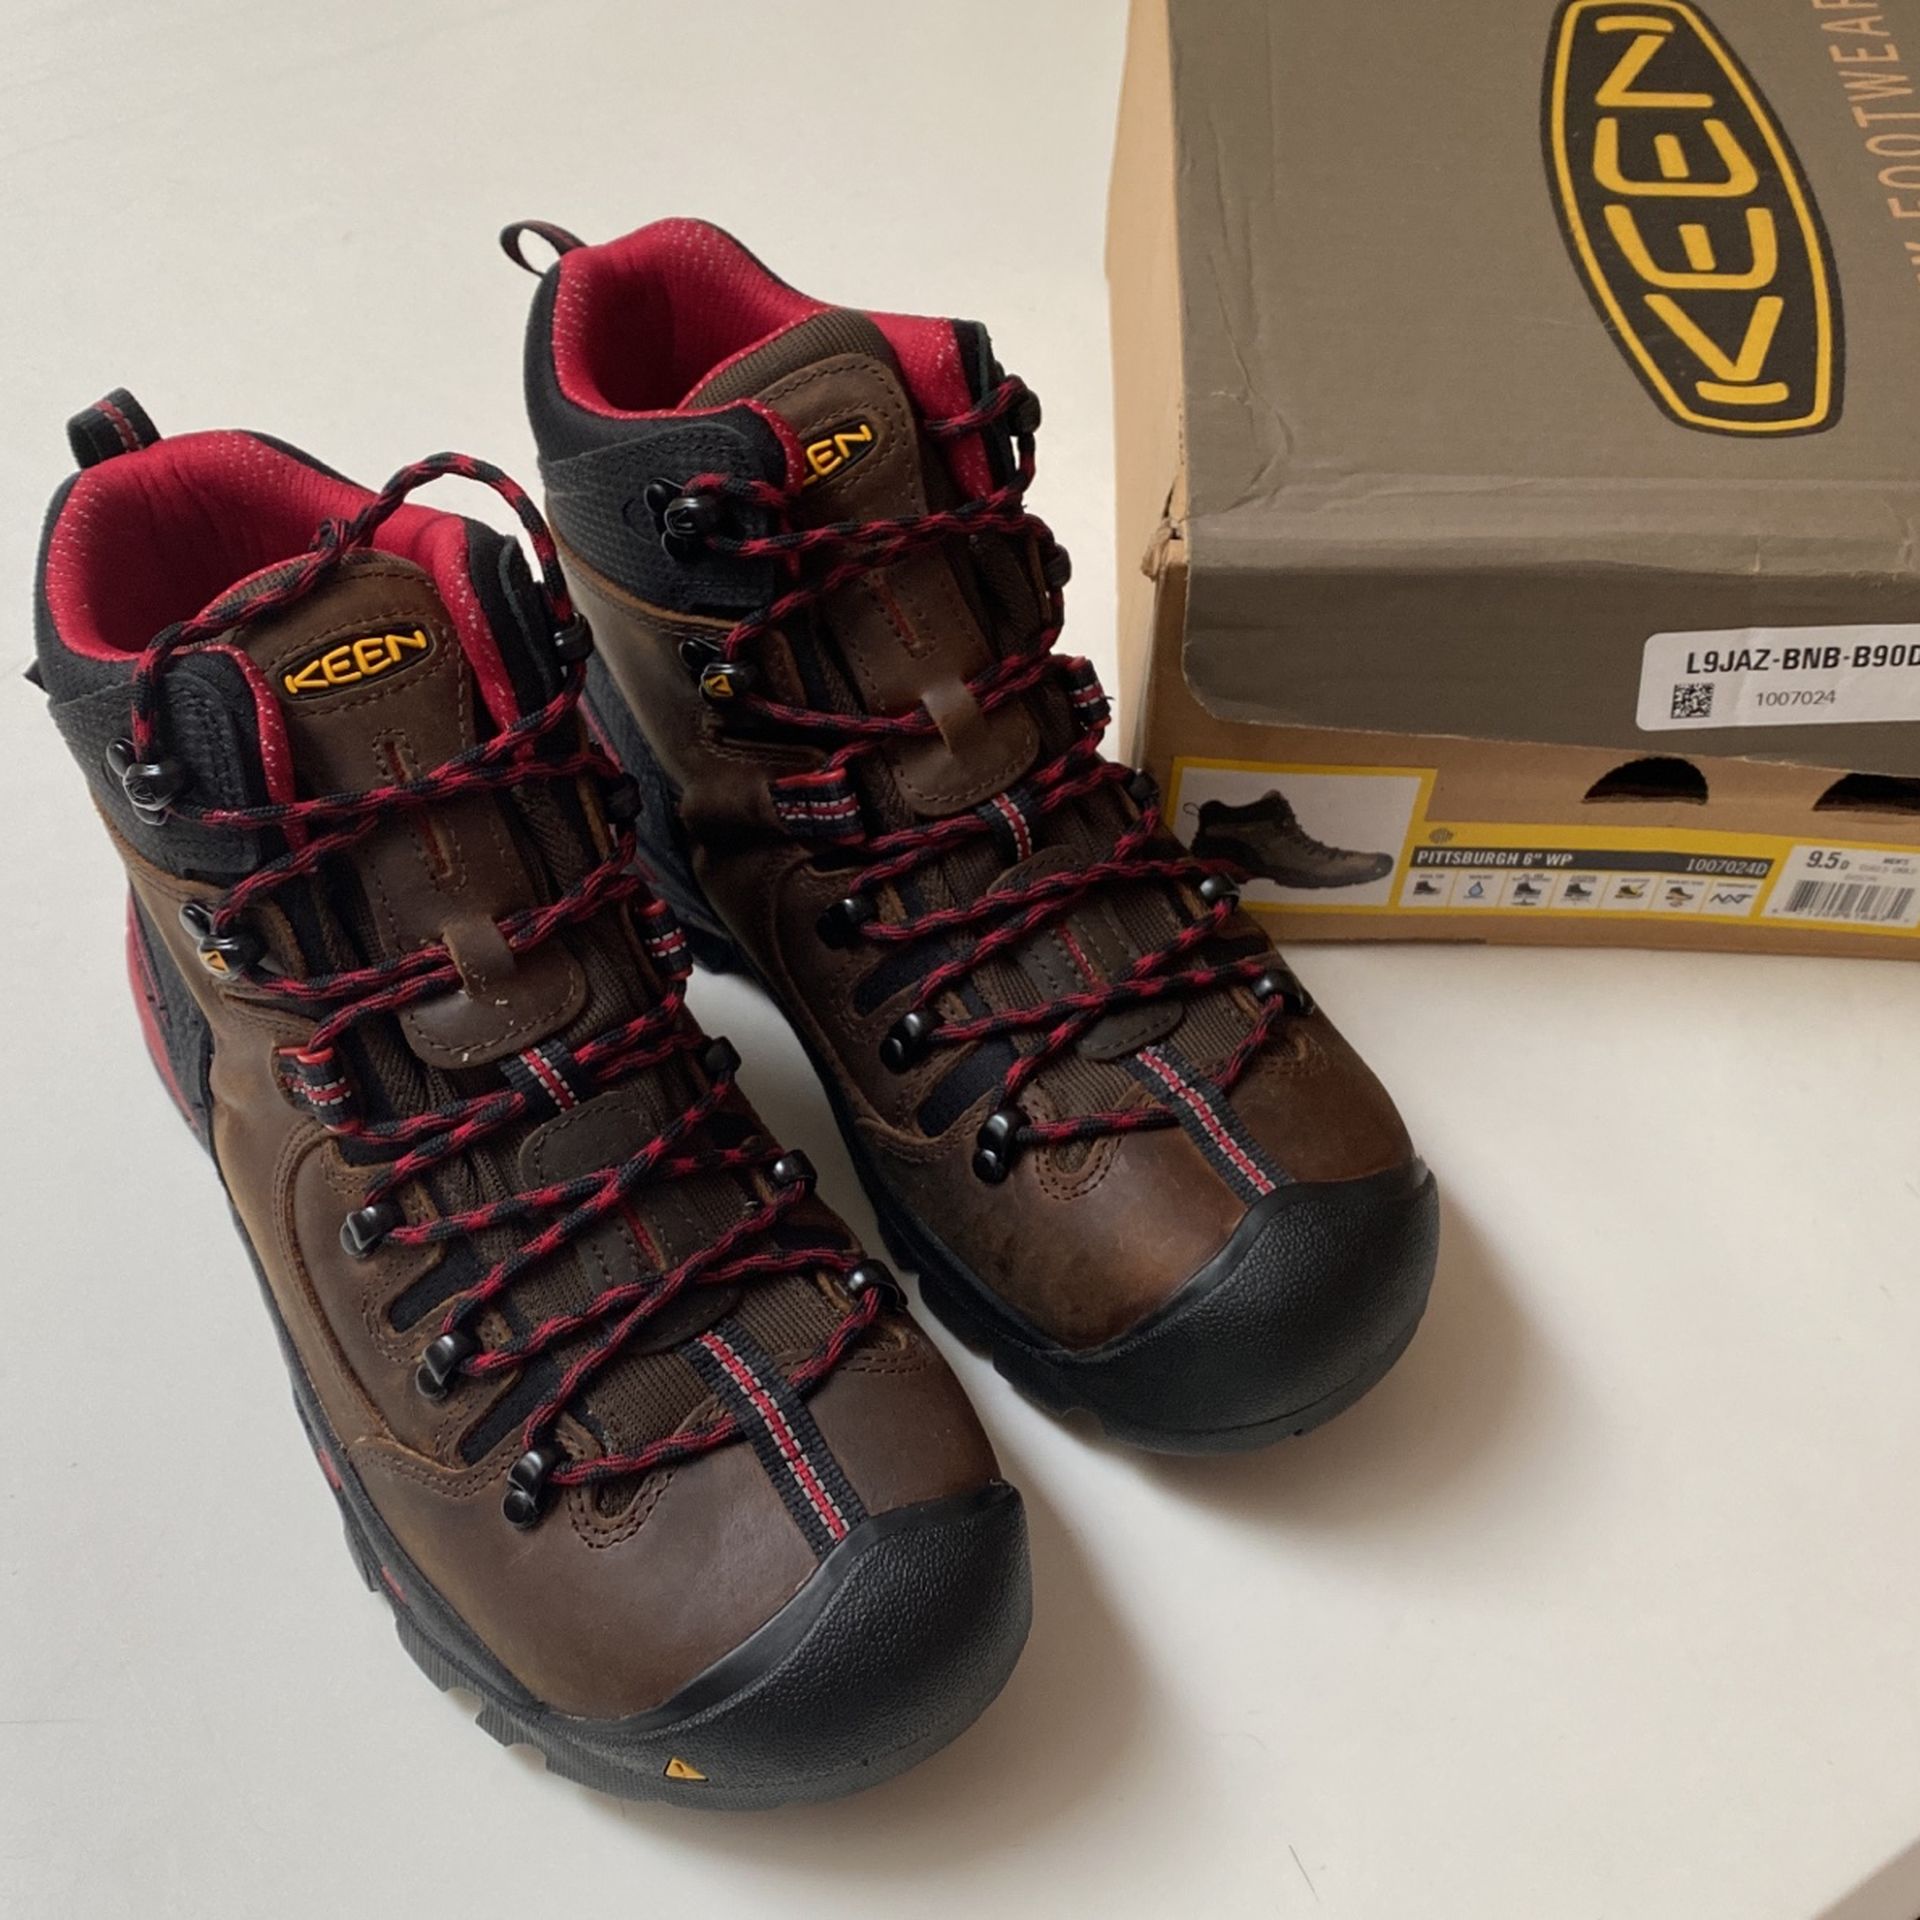 Keen Pittsburgh 6” Men’s Work / Safety Boots , Size 9.5D Width 